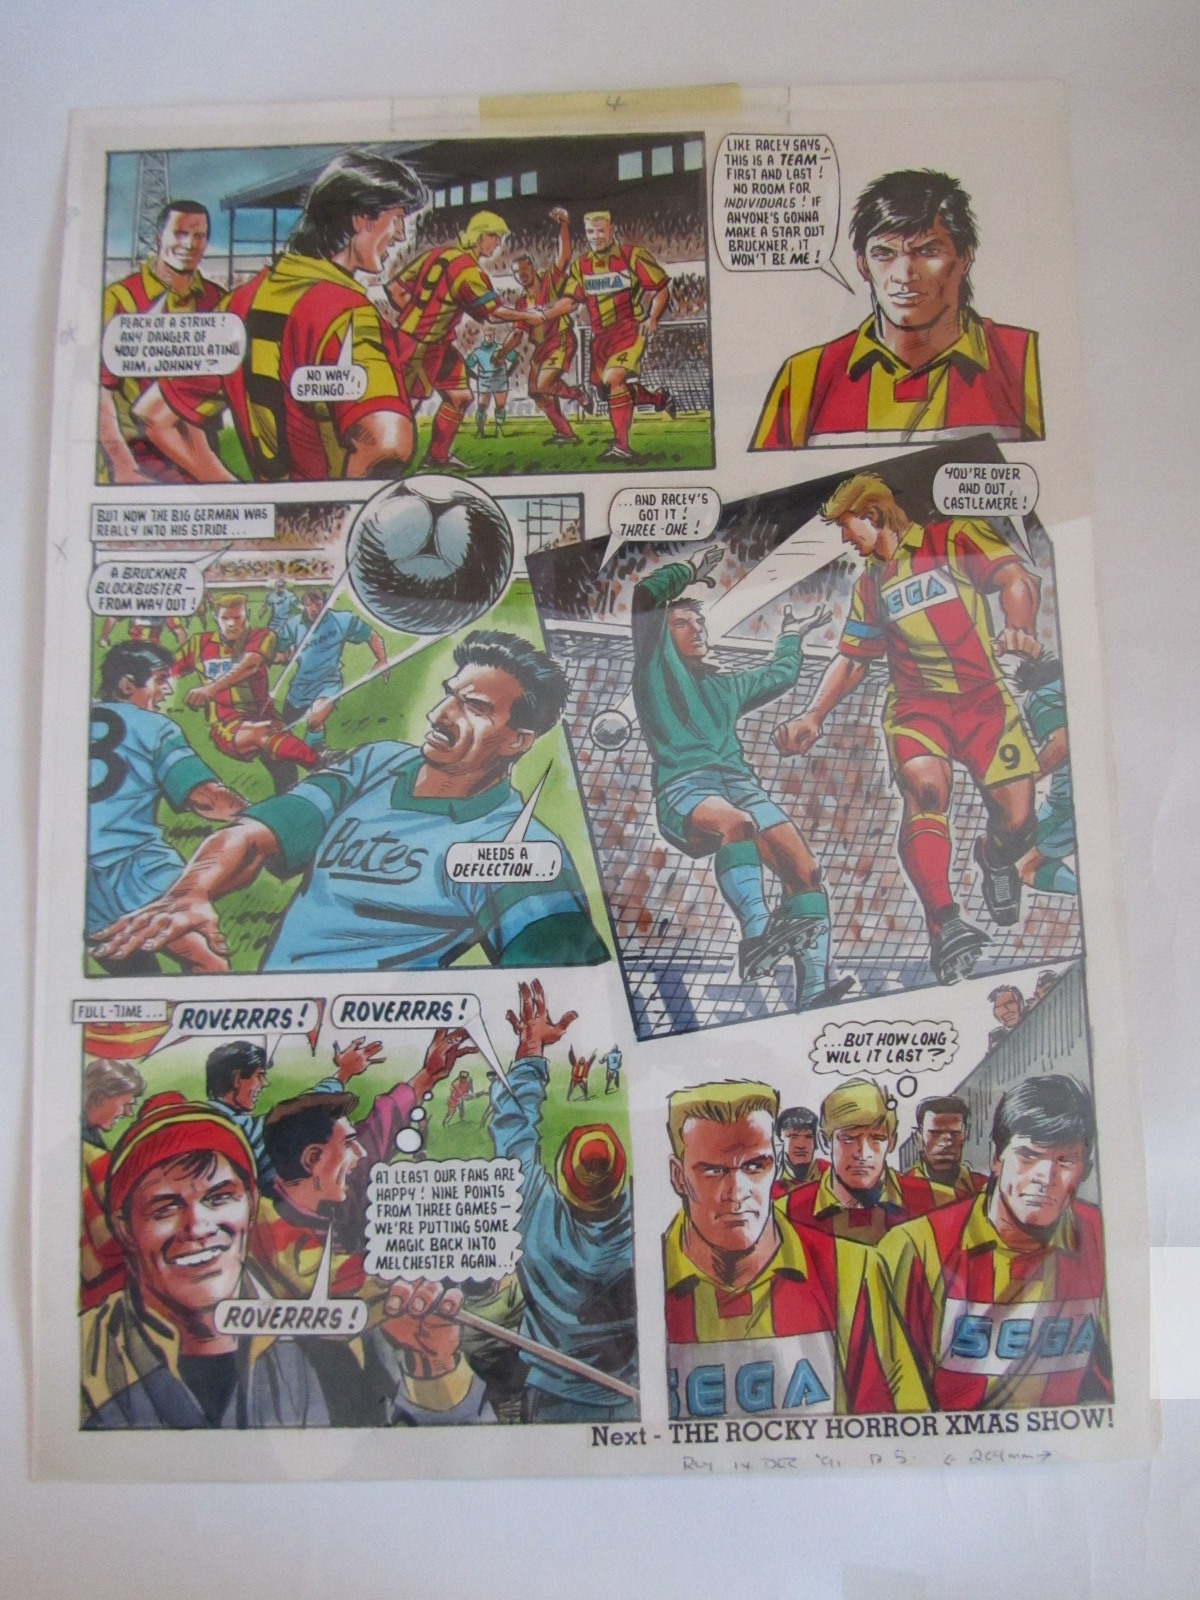 FOOTBALL - ROY OF THE ROVERS COMPLETE 4 PANEL STORYLINE FOR THE ISSUE PUBLISHED ON THE 14th OF - Image 5 of 5